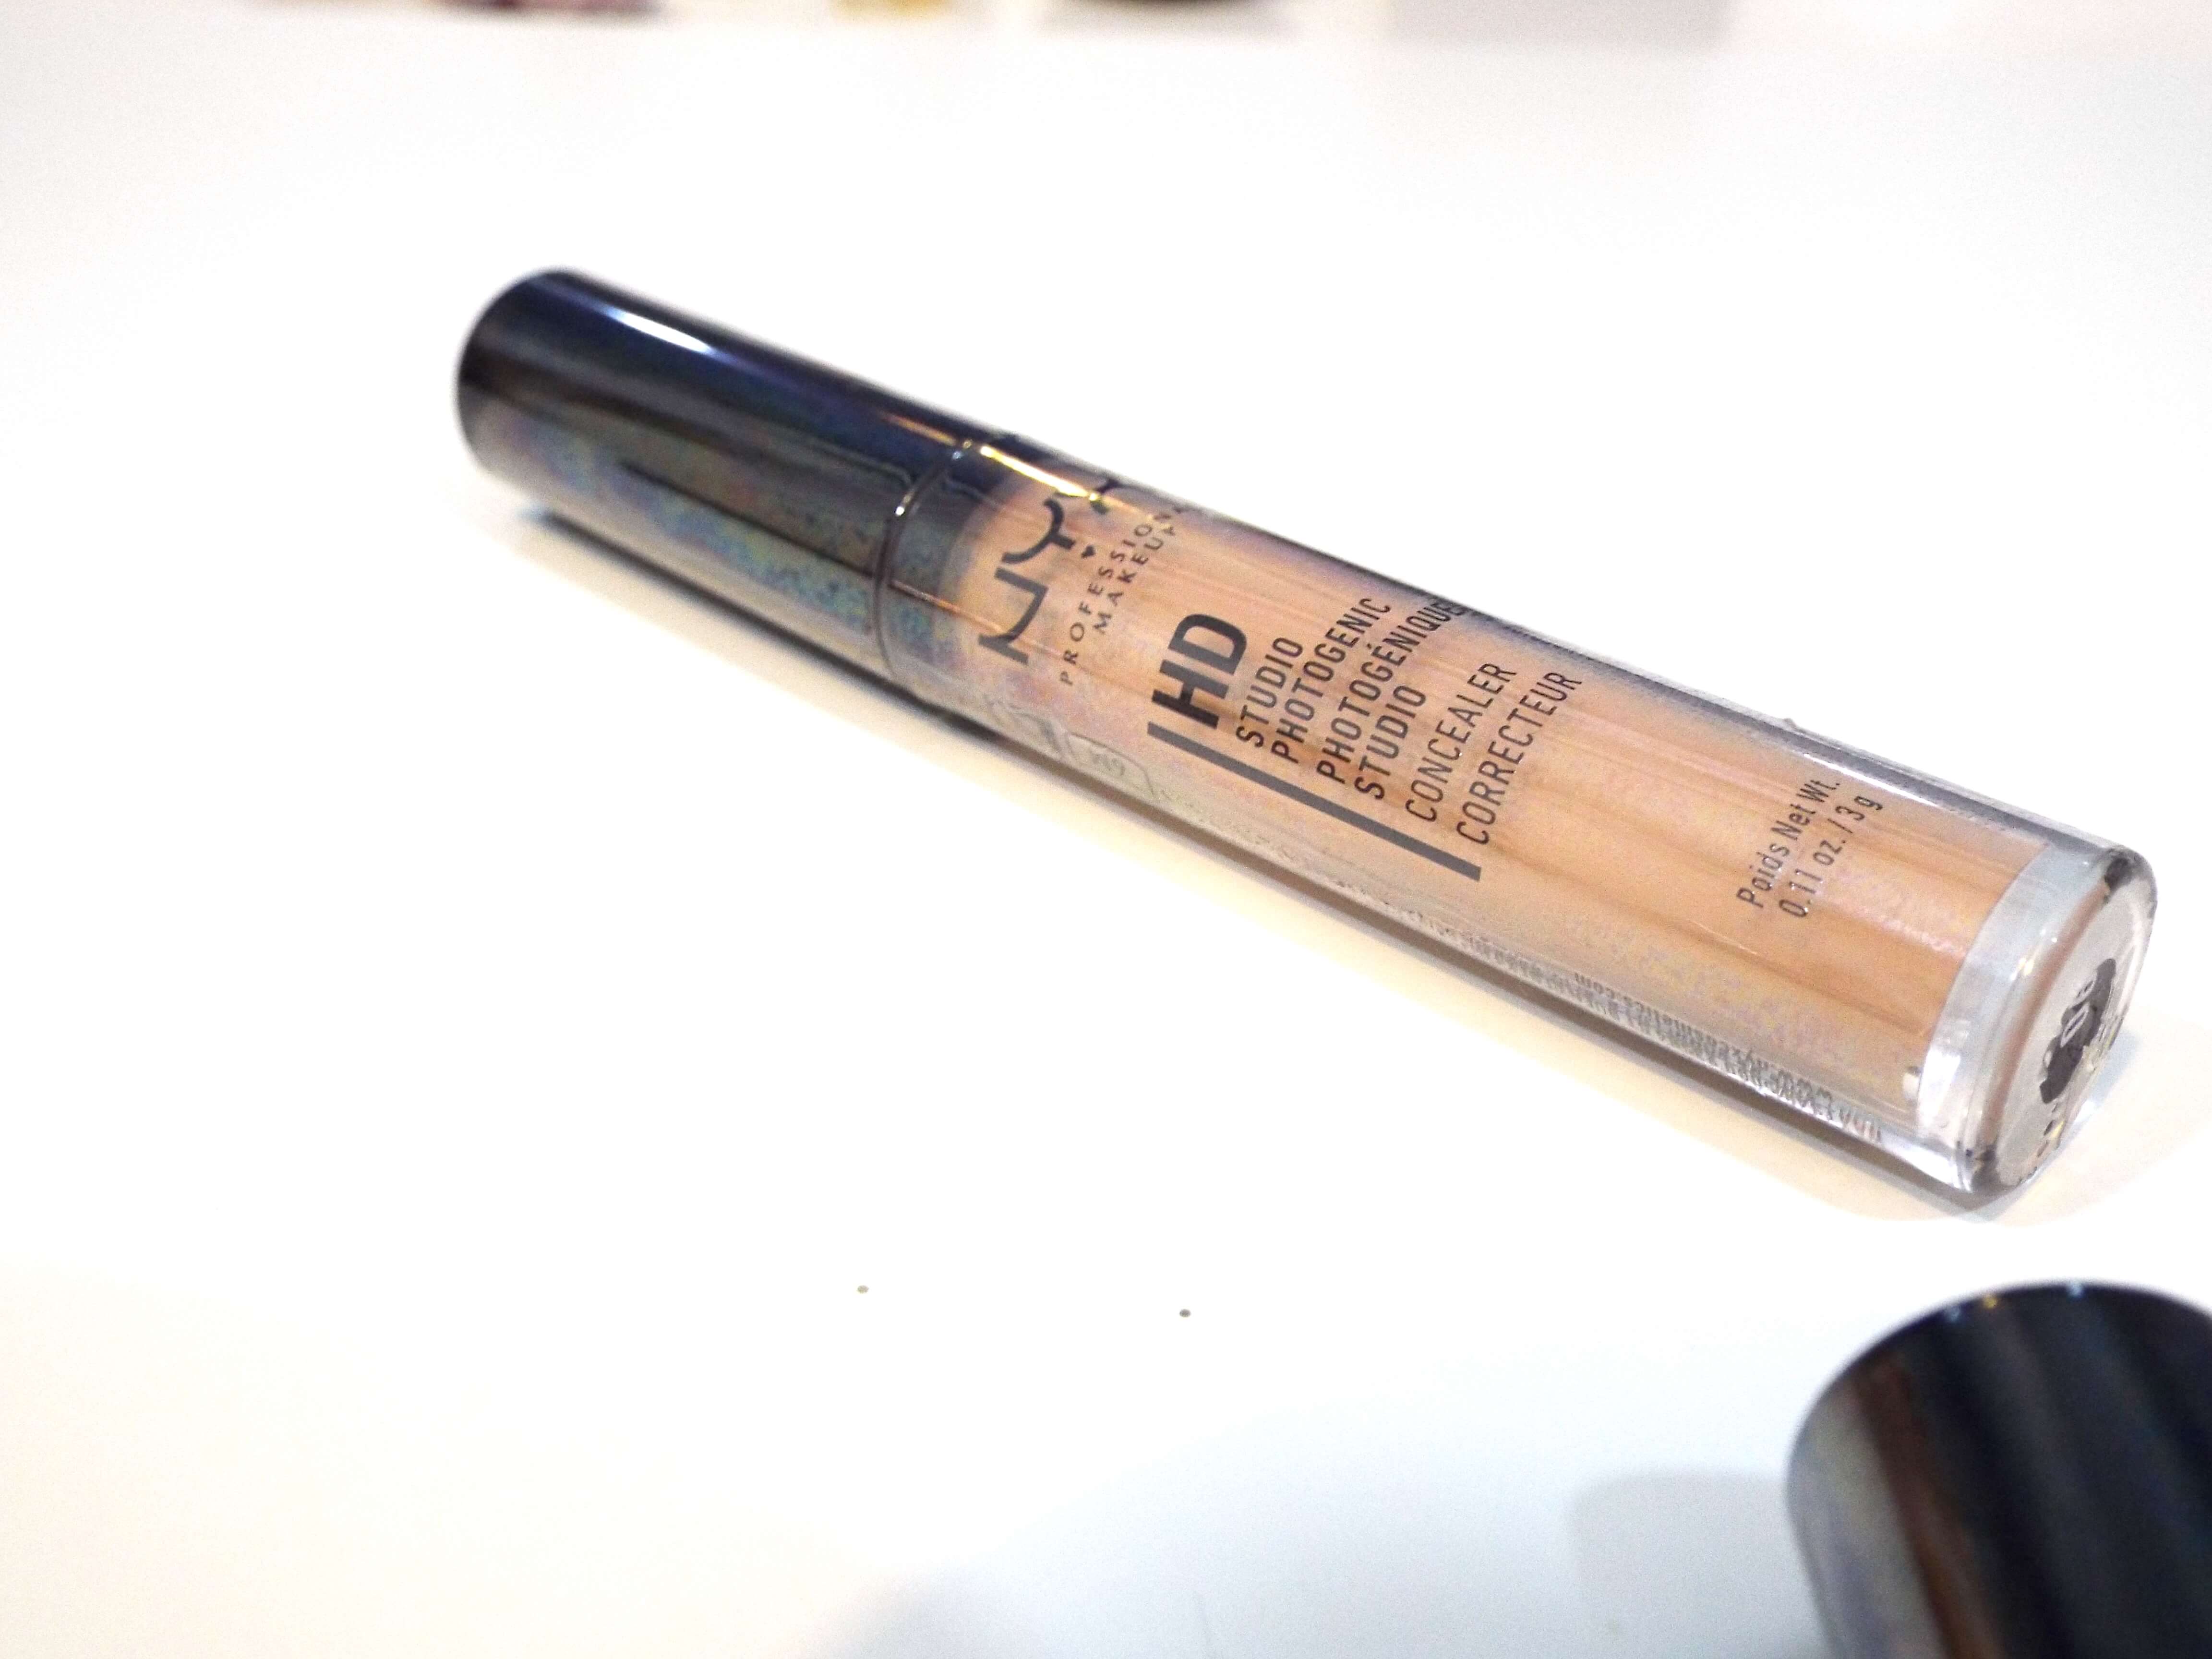 The NYX HD Concealer in shade 06 glow, resting on white desk.